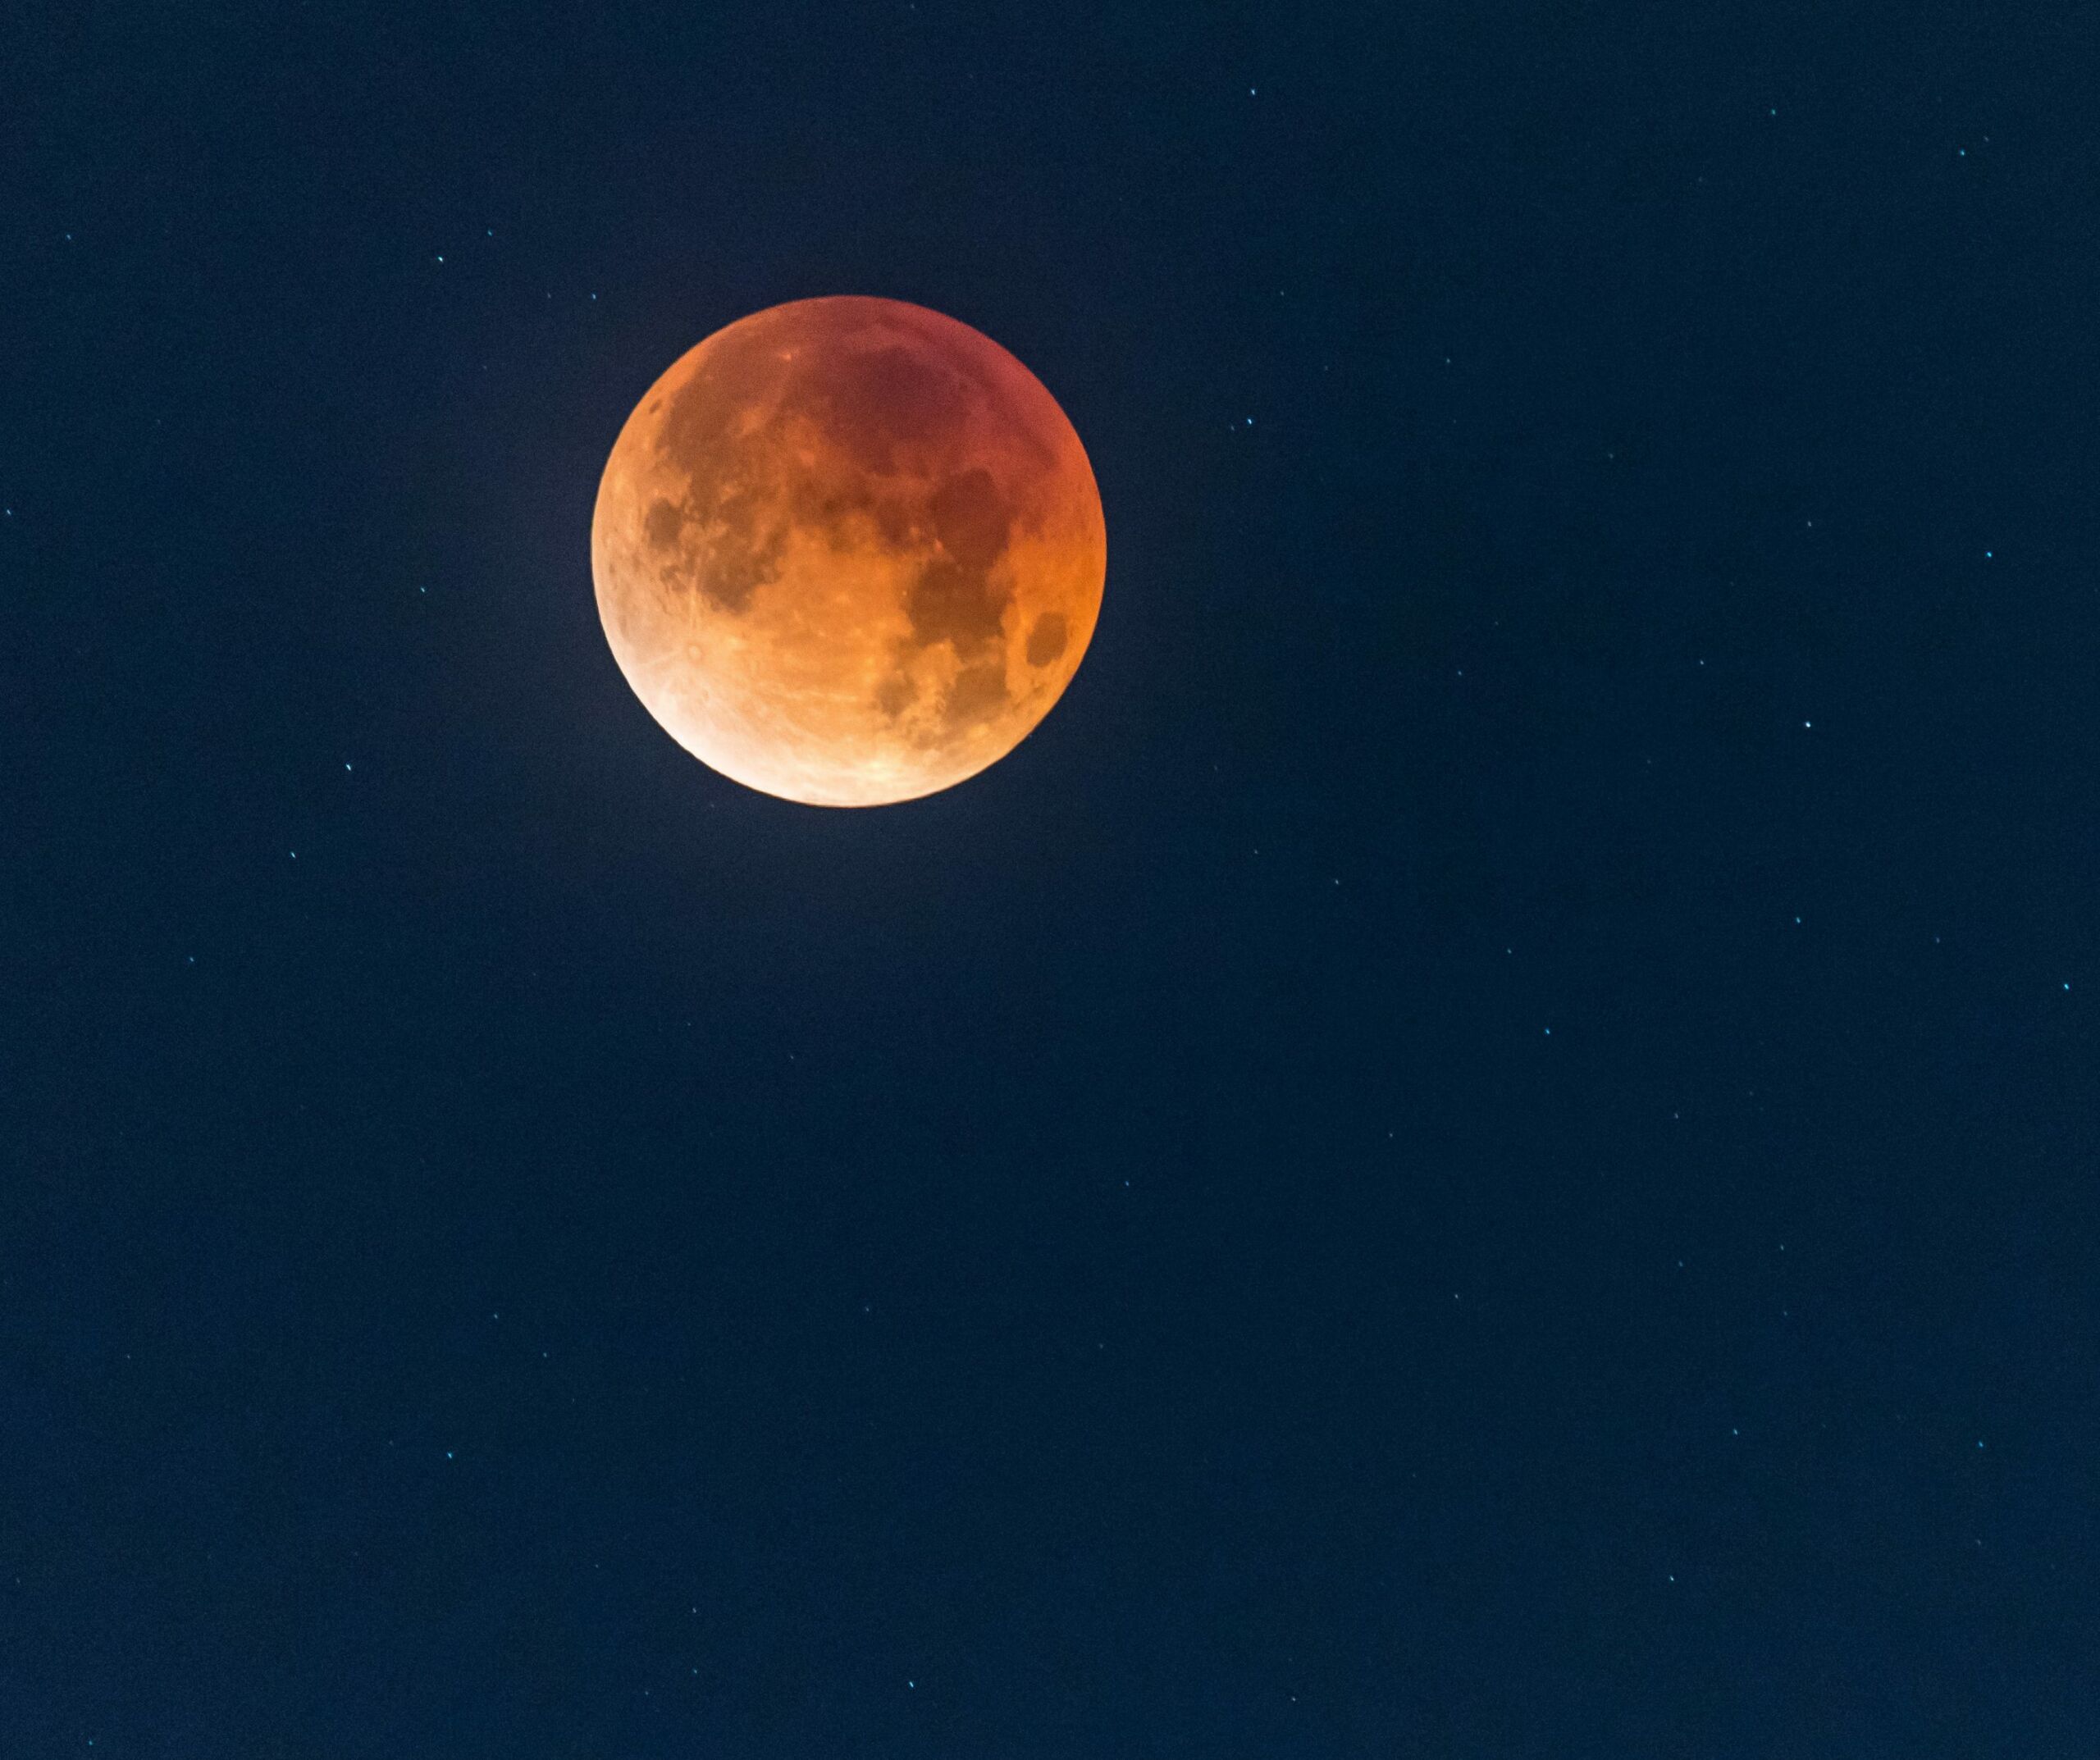 A total lunar eclipse similar to what can be observed on May 26.